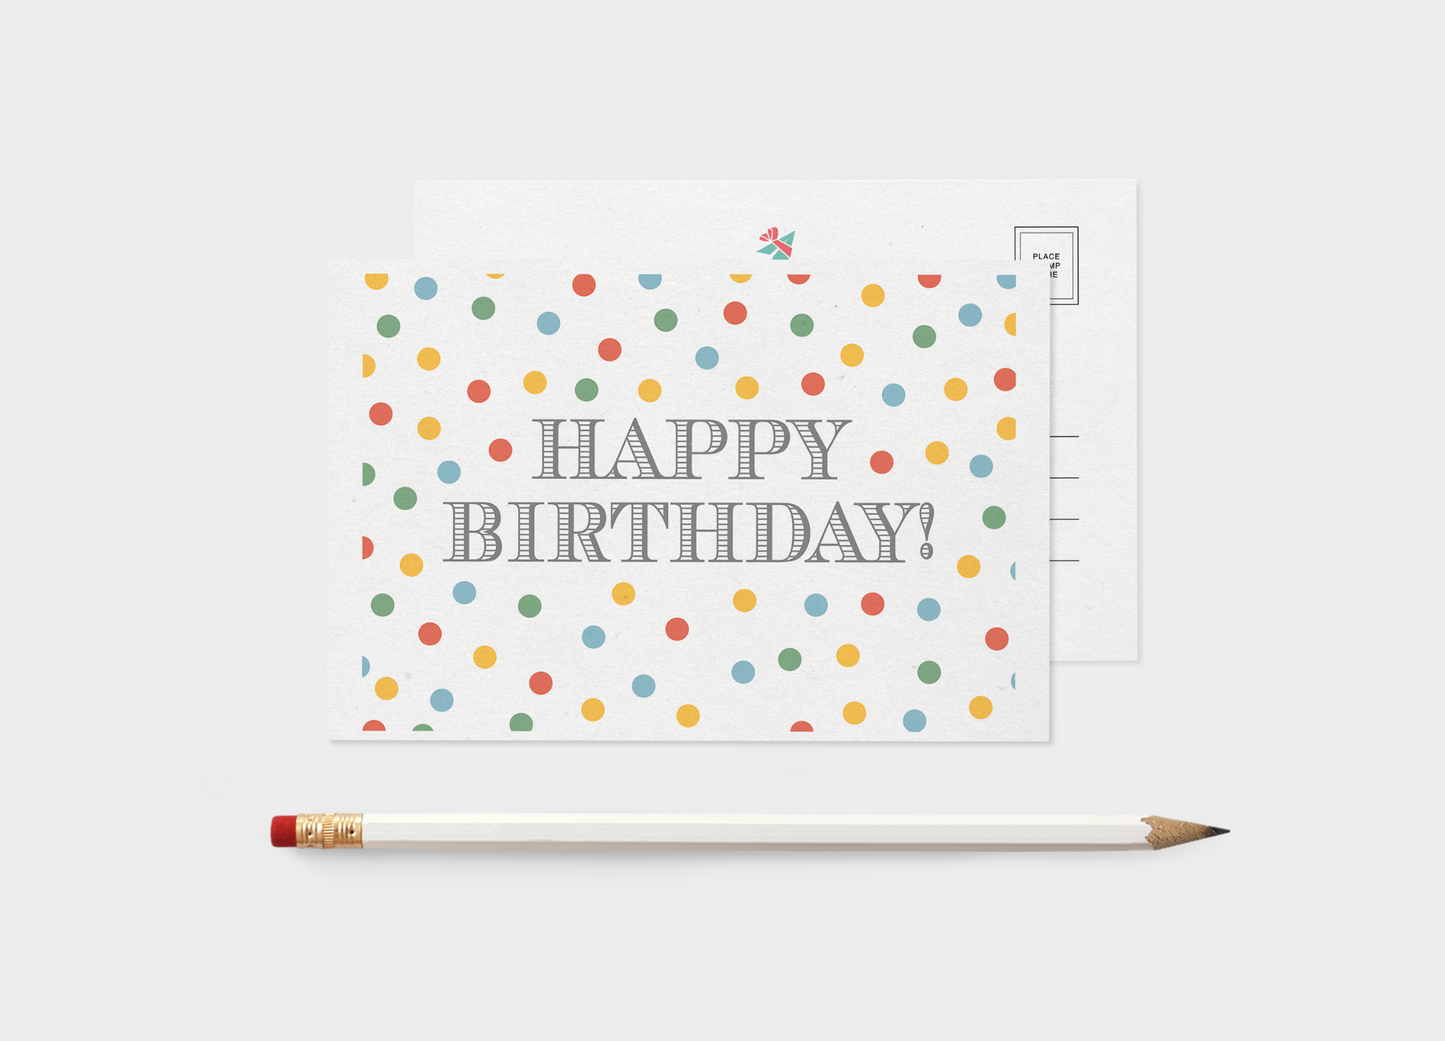 Happy Birthday Confetti Postcard Pack Of 5 or 10 Cards.